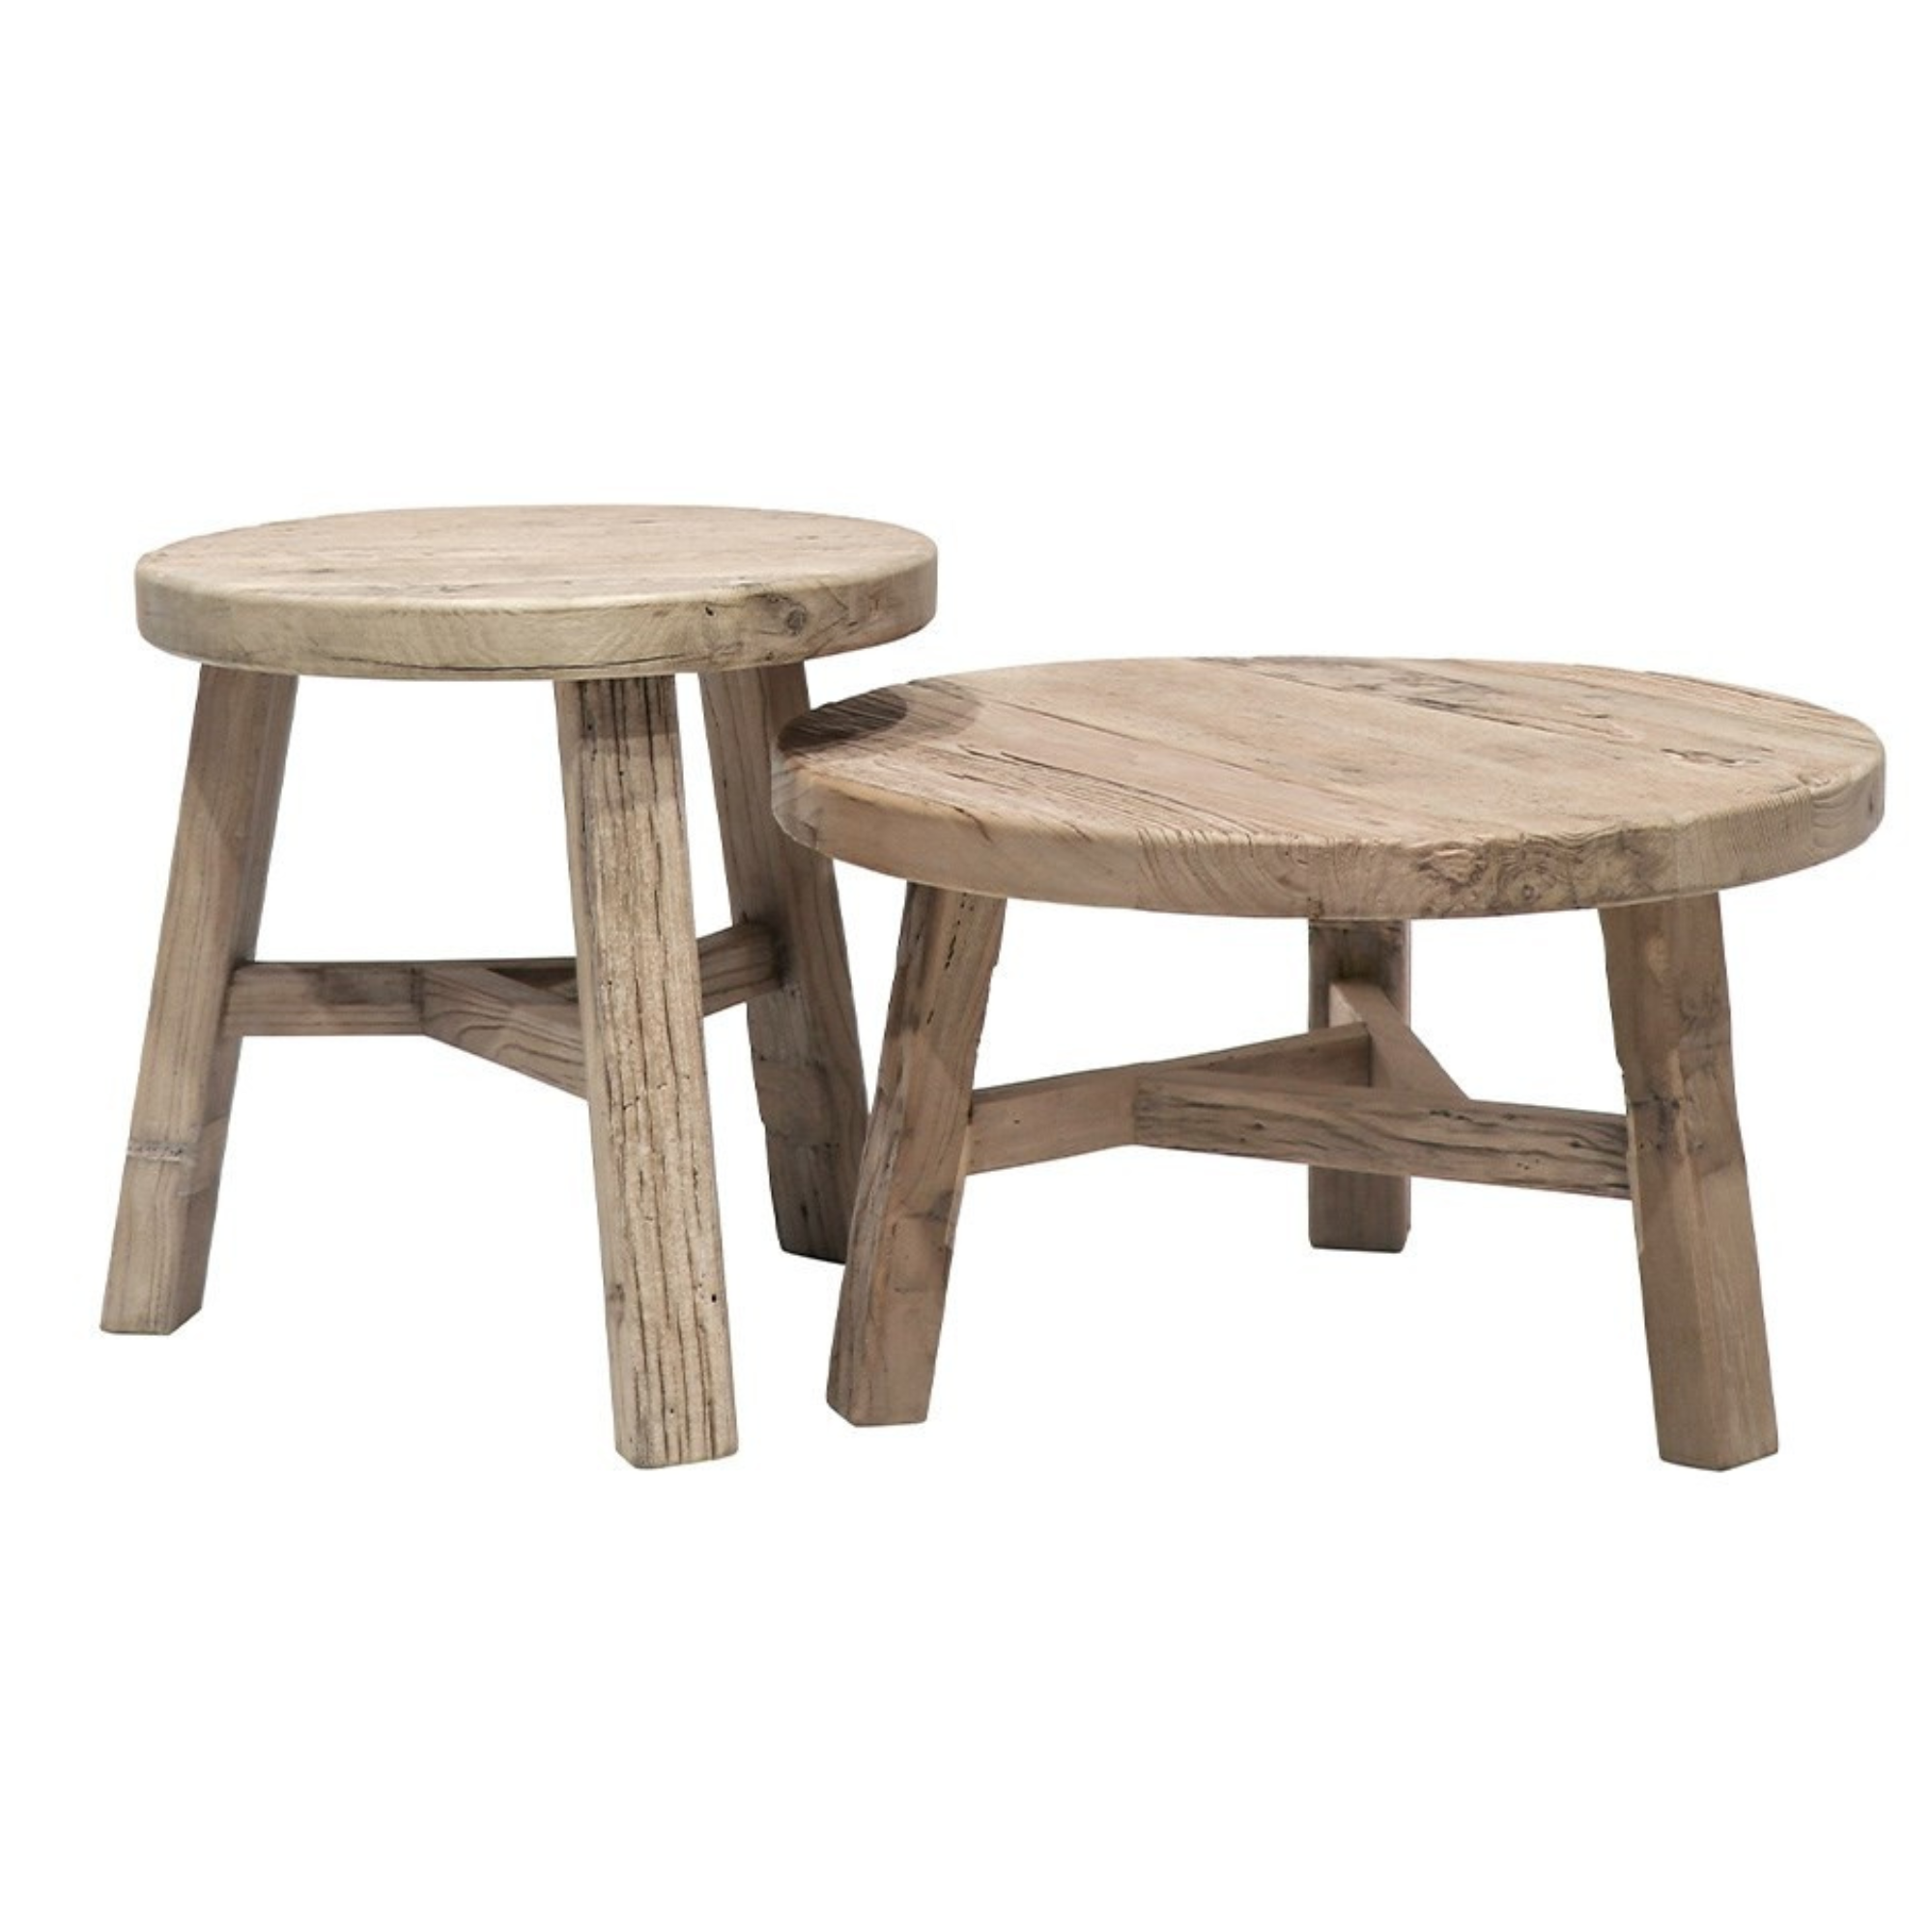 PARQ TALL NESTING TABLE | NATURAL OR BLACK